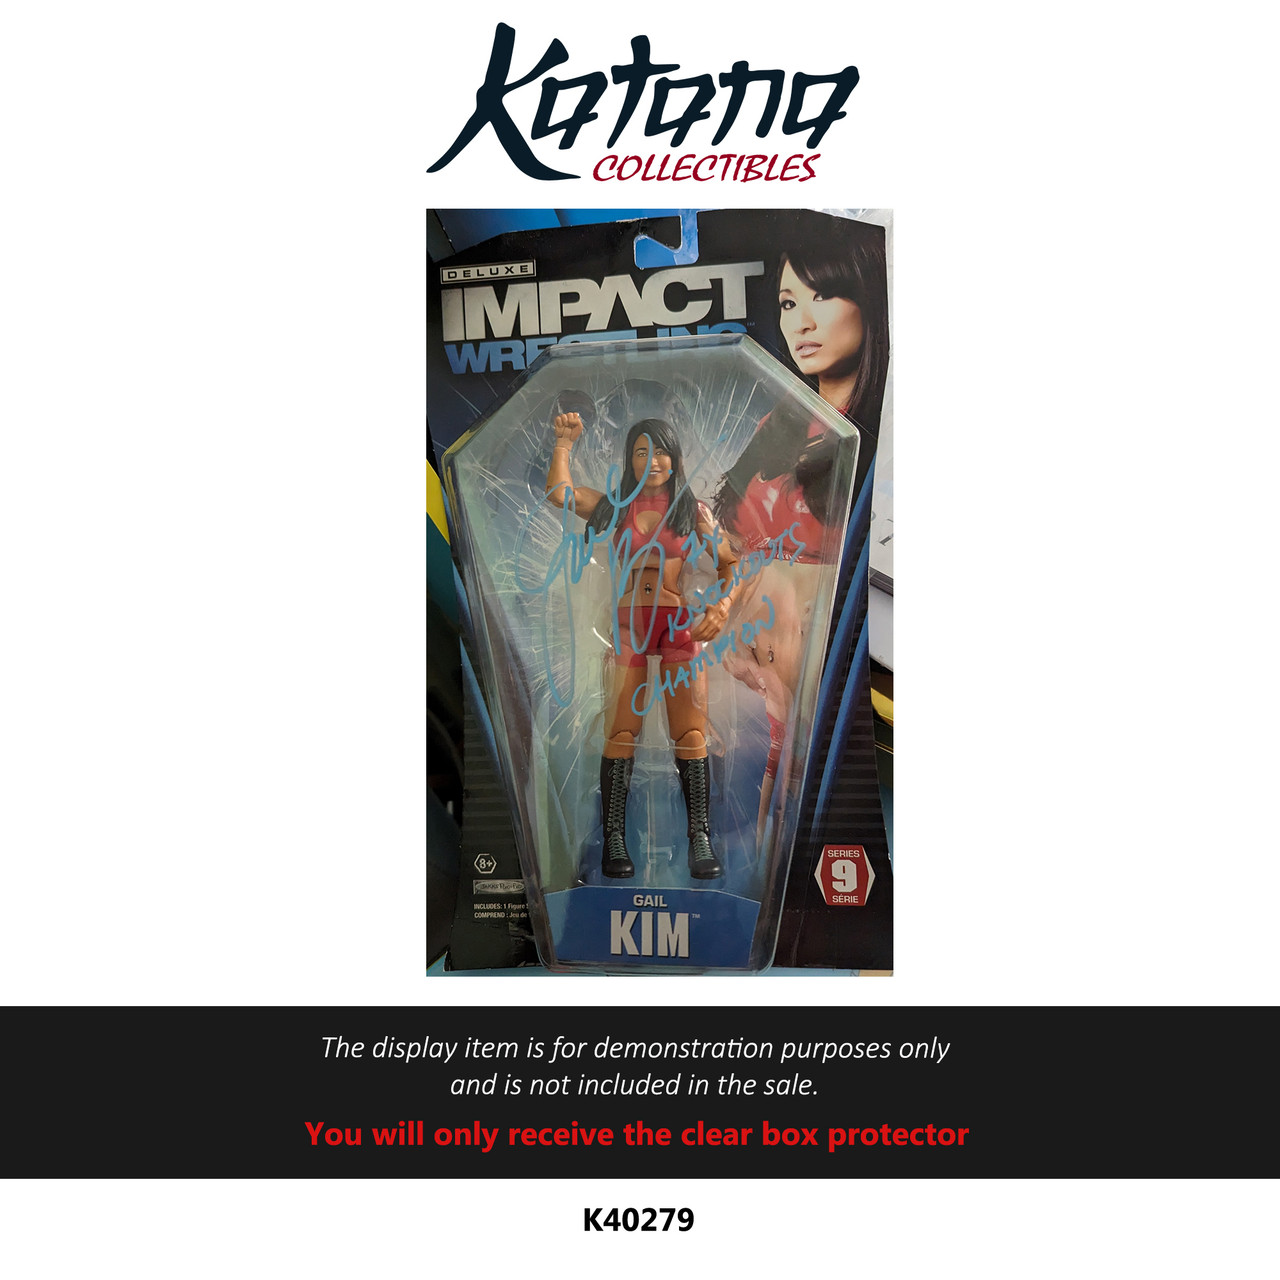 Katana Collectibles Protector For Gail Kim Deluxe Impact Wrestling Figure